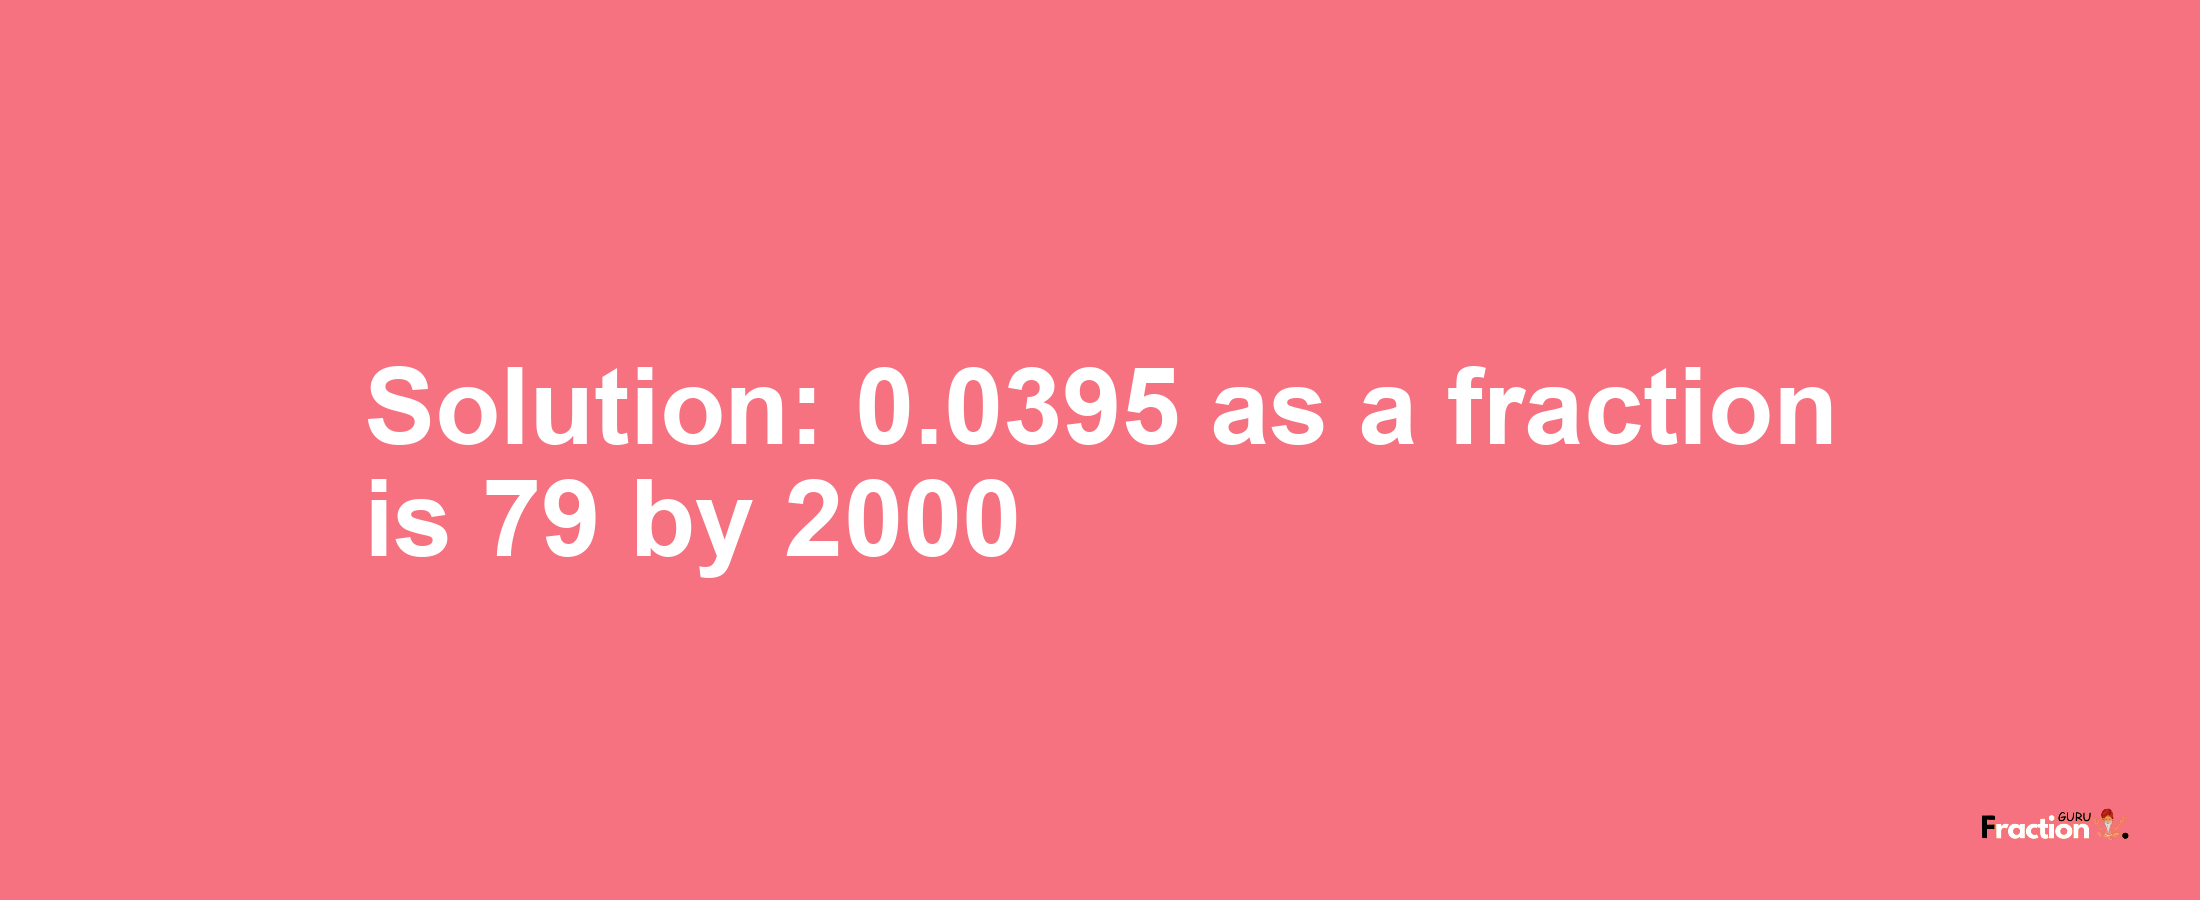 Solution:0.0395 as a fraction is 79/2000